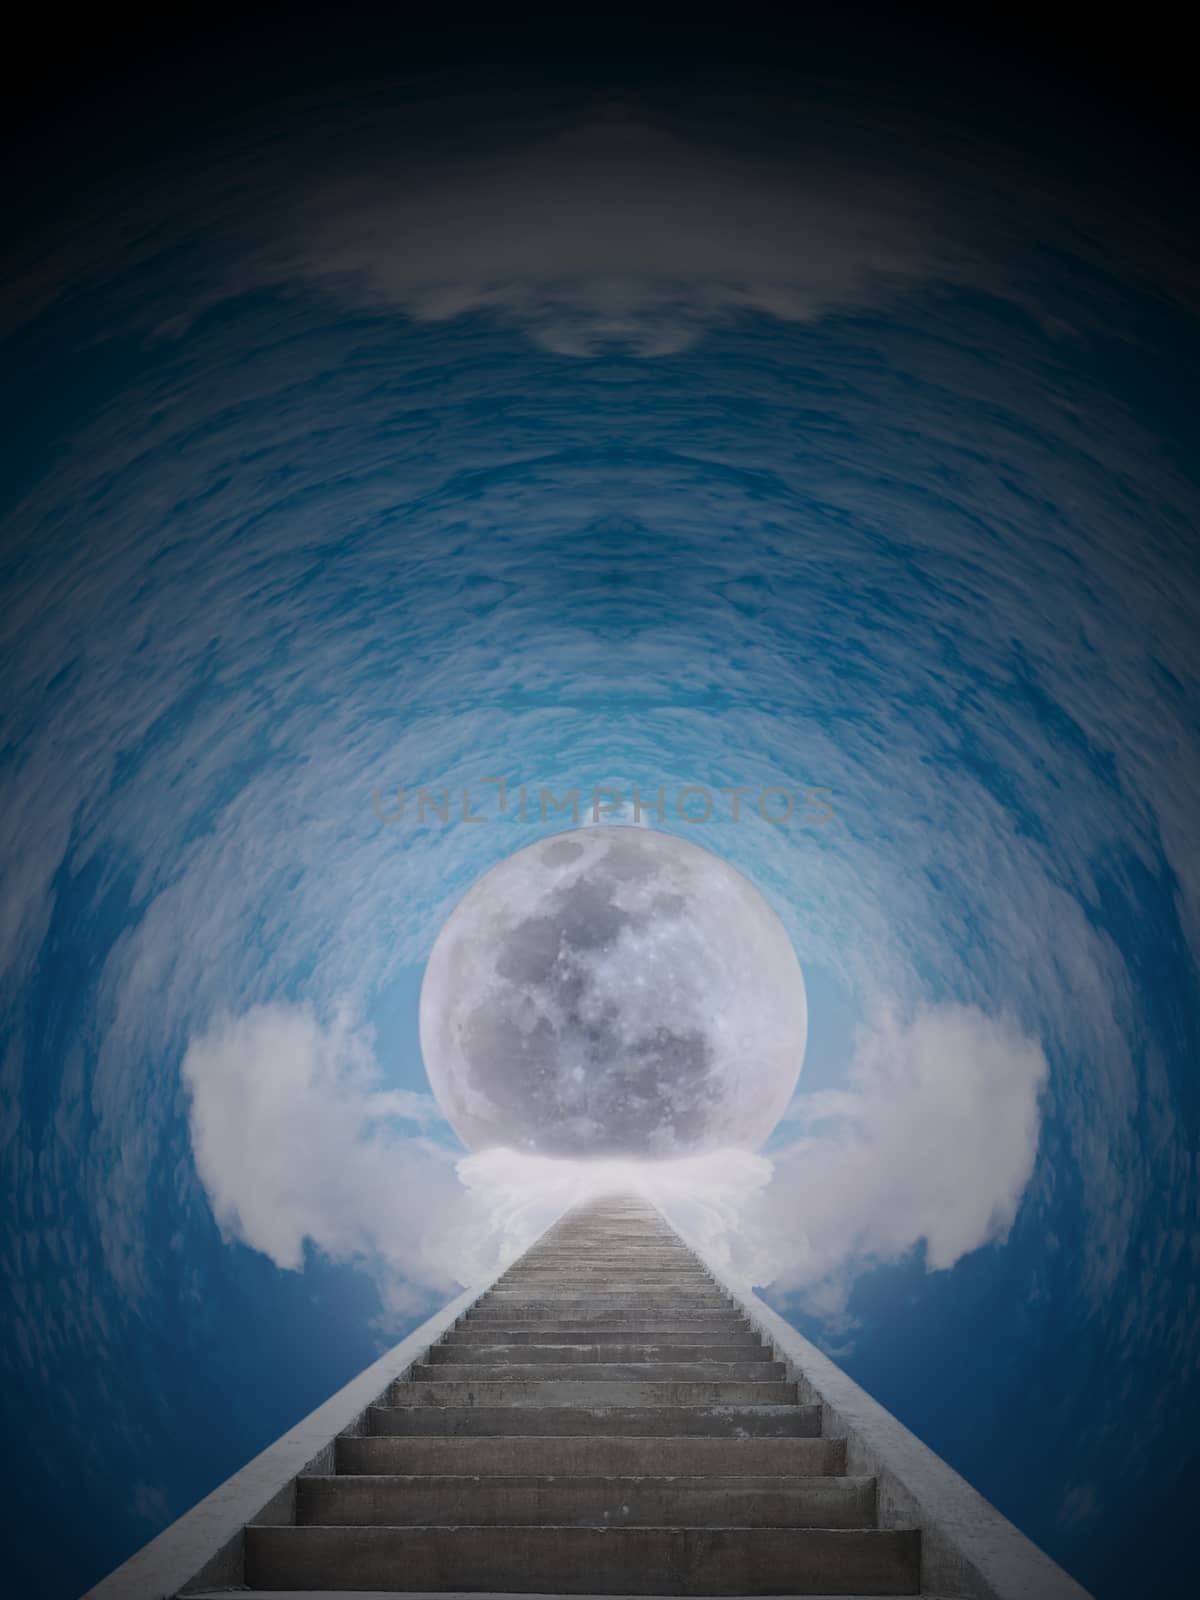 Staircase to the moon by Exsodus